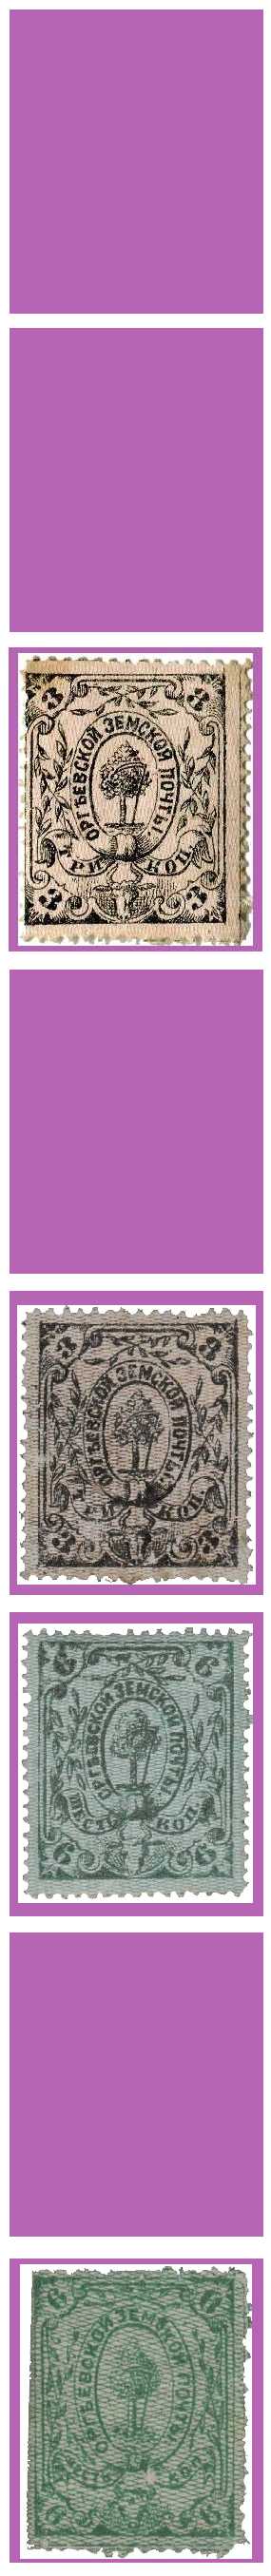 1871/1879 Russia Zemstvo, Orgeev (Moscow)